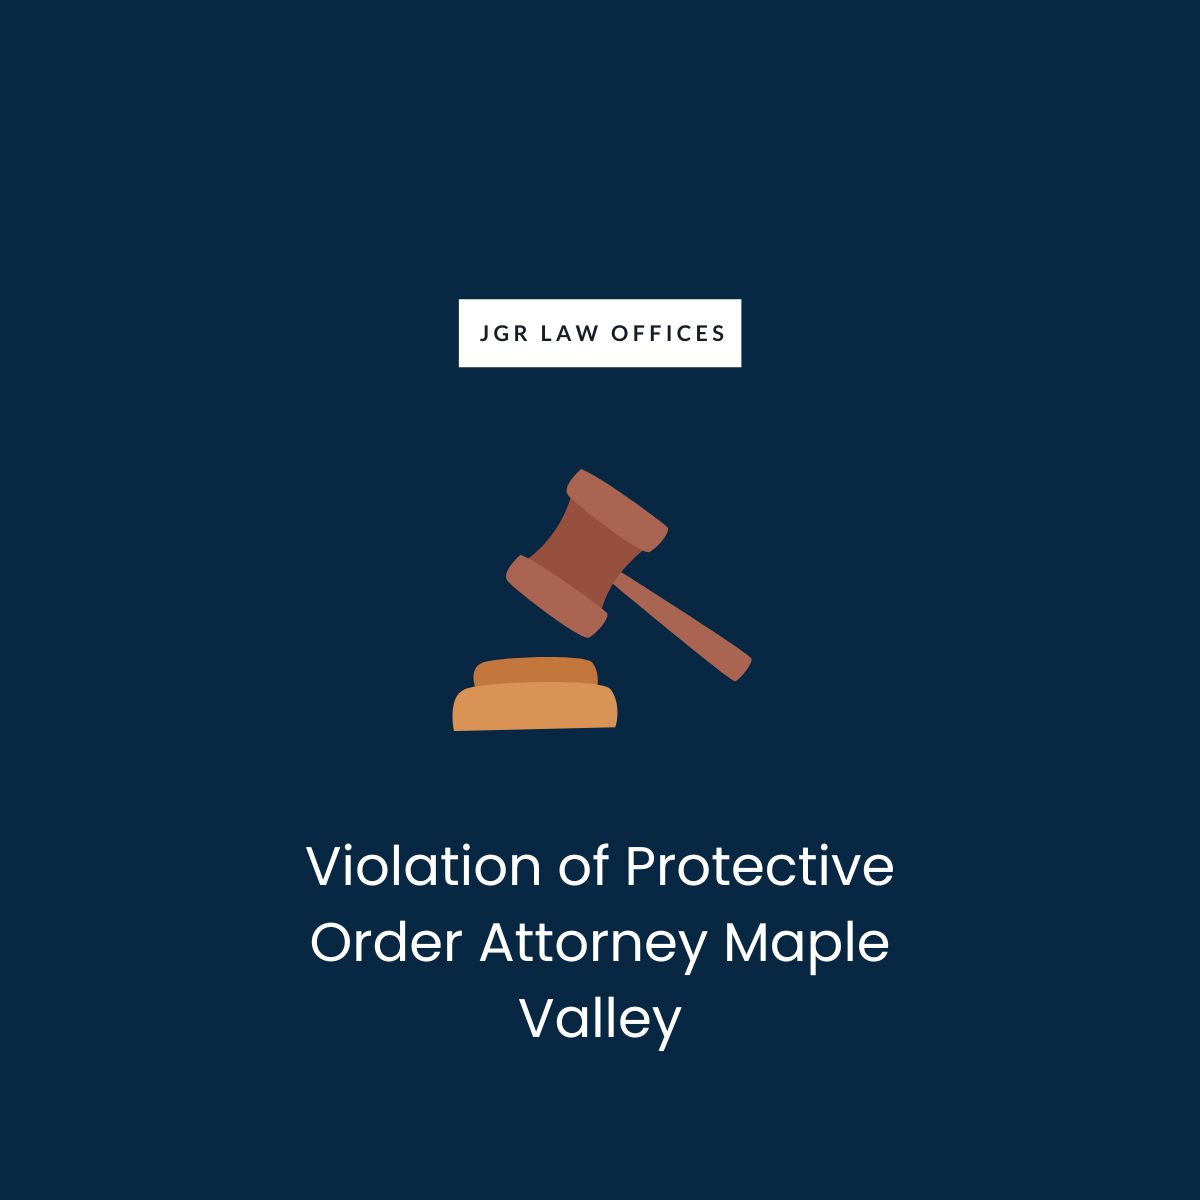 Violation of Protective Order Attorney Maple Valley